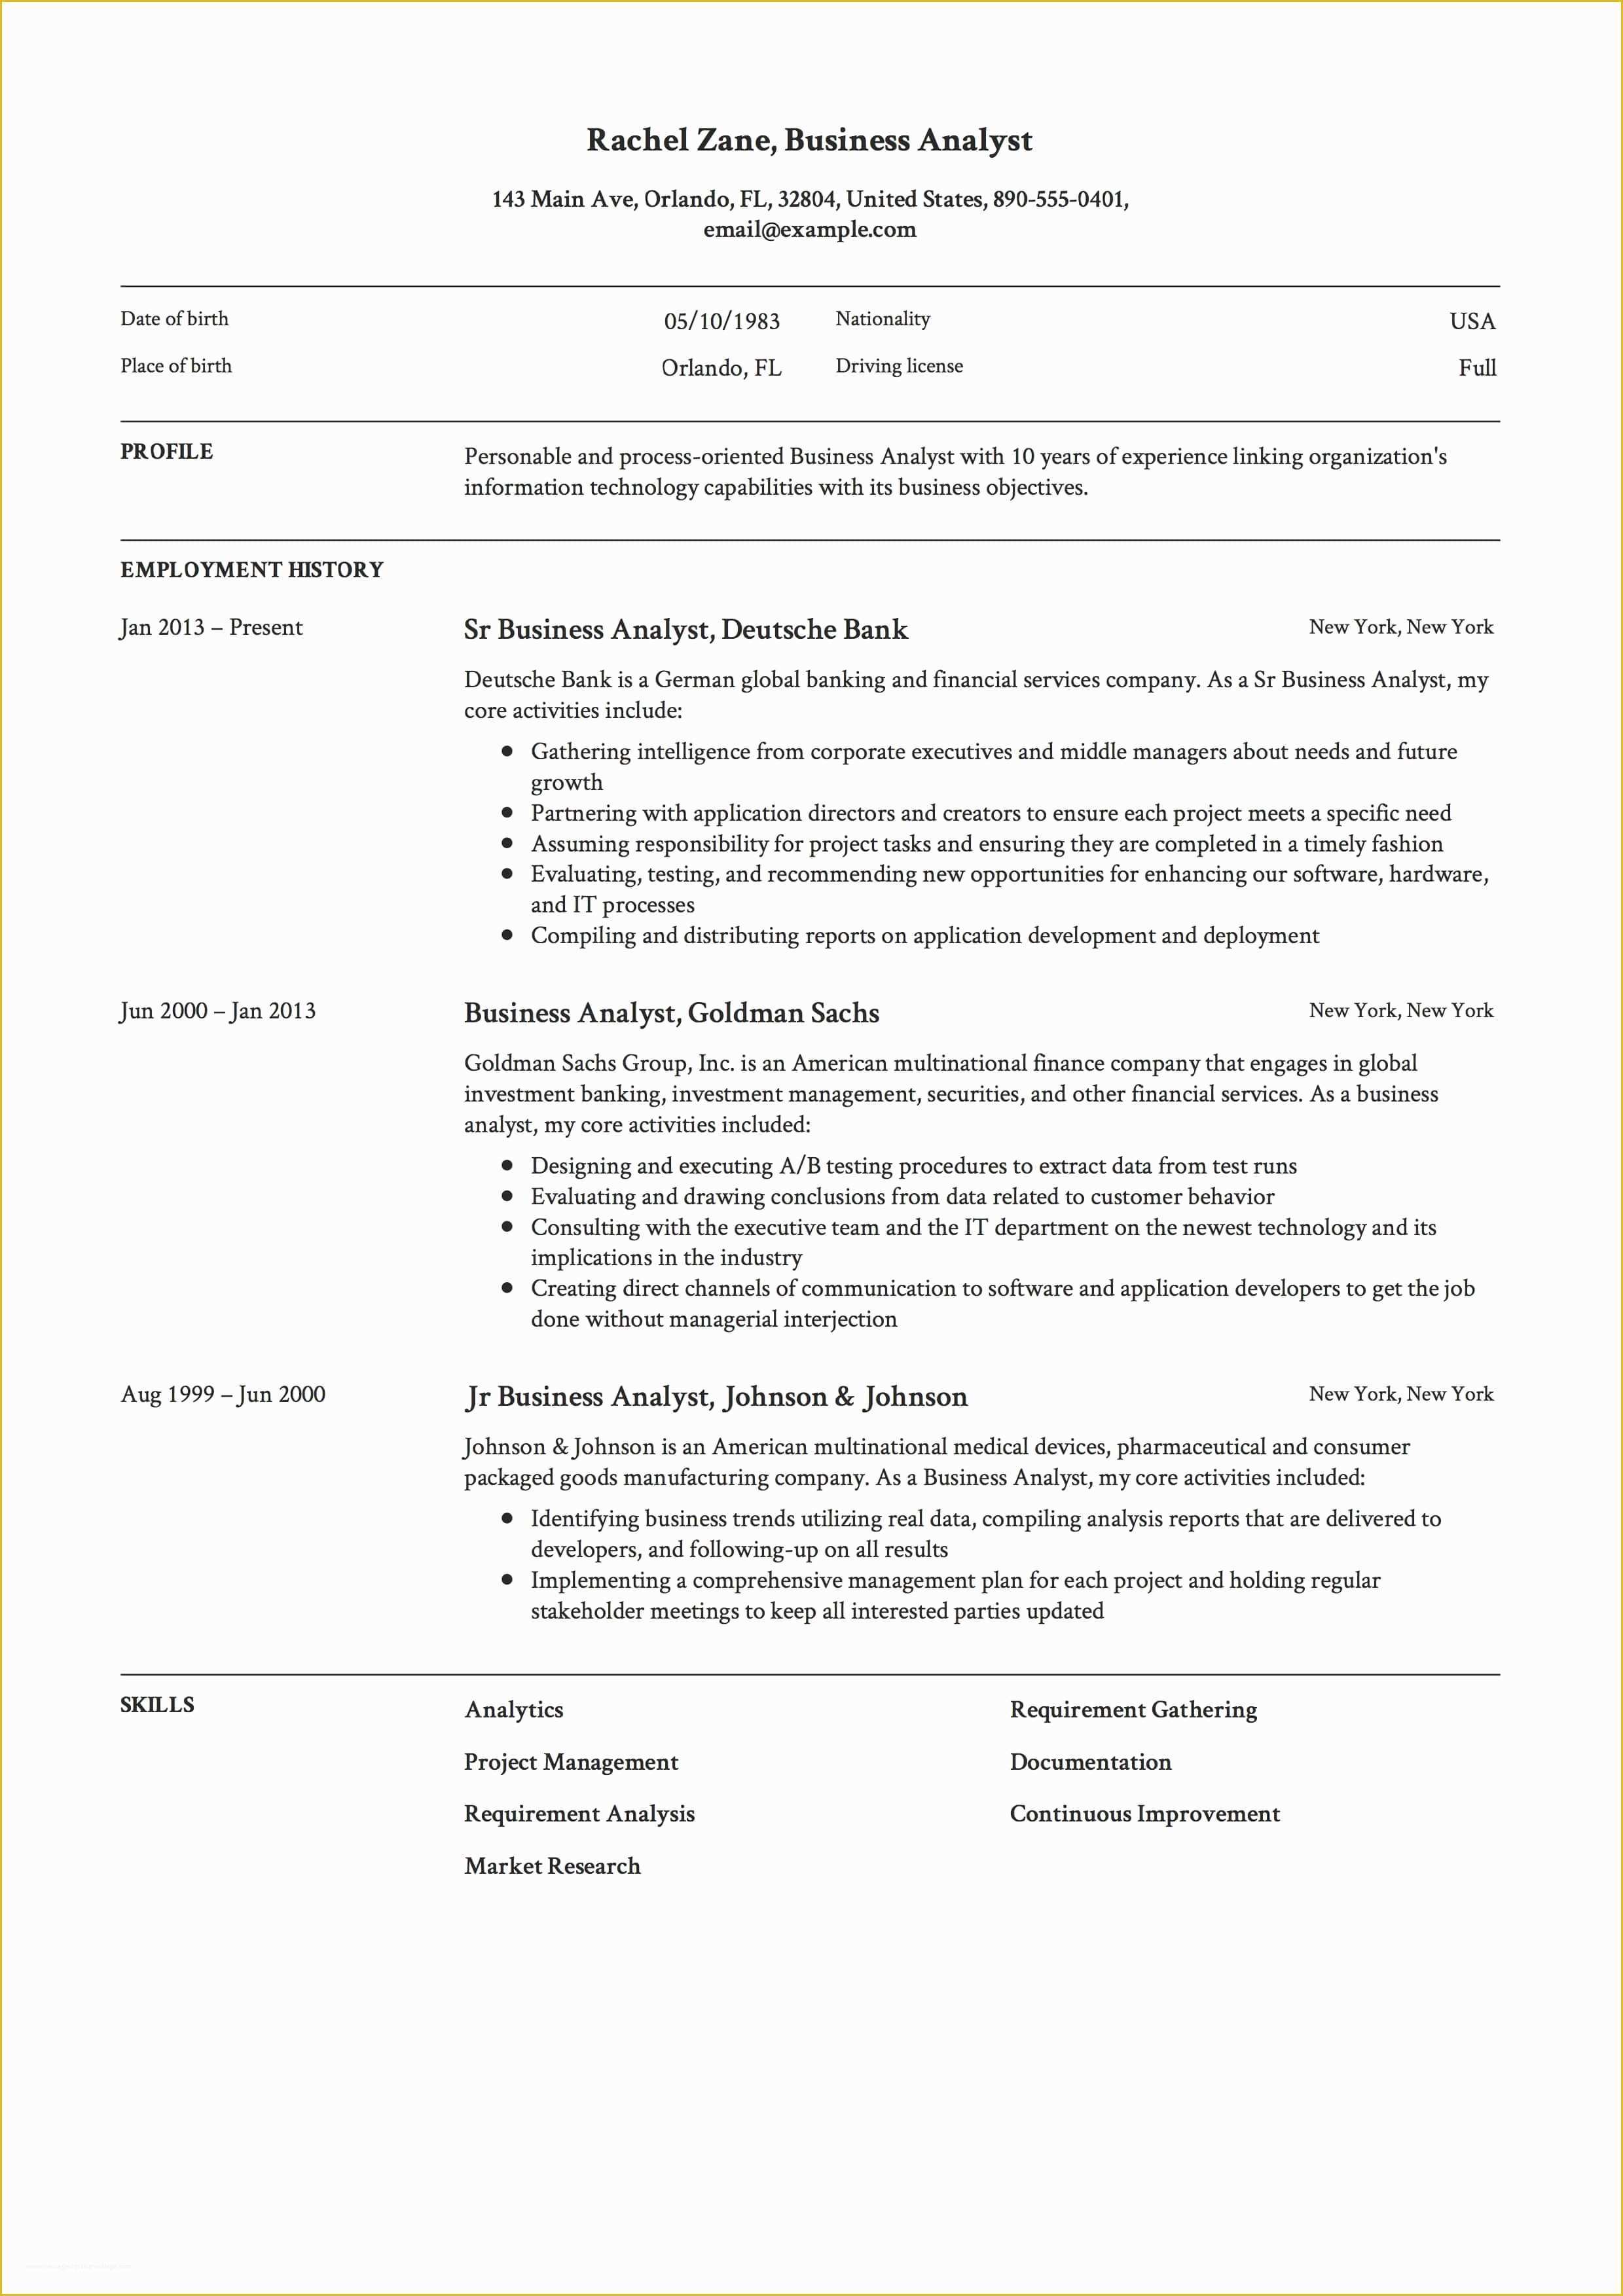 Free Business Resume Template 2018 Of Full Guide Project Manager Resume & 12 Resume Samples